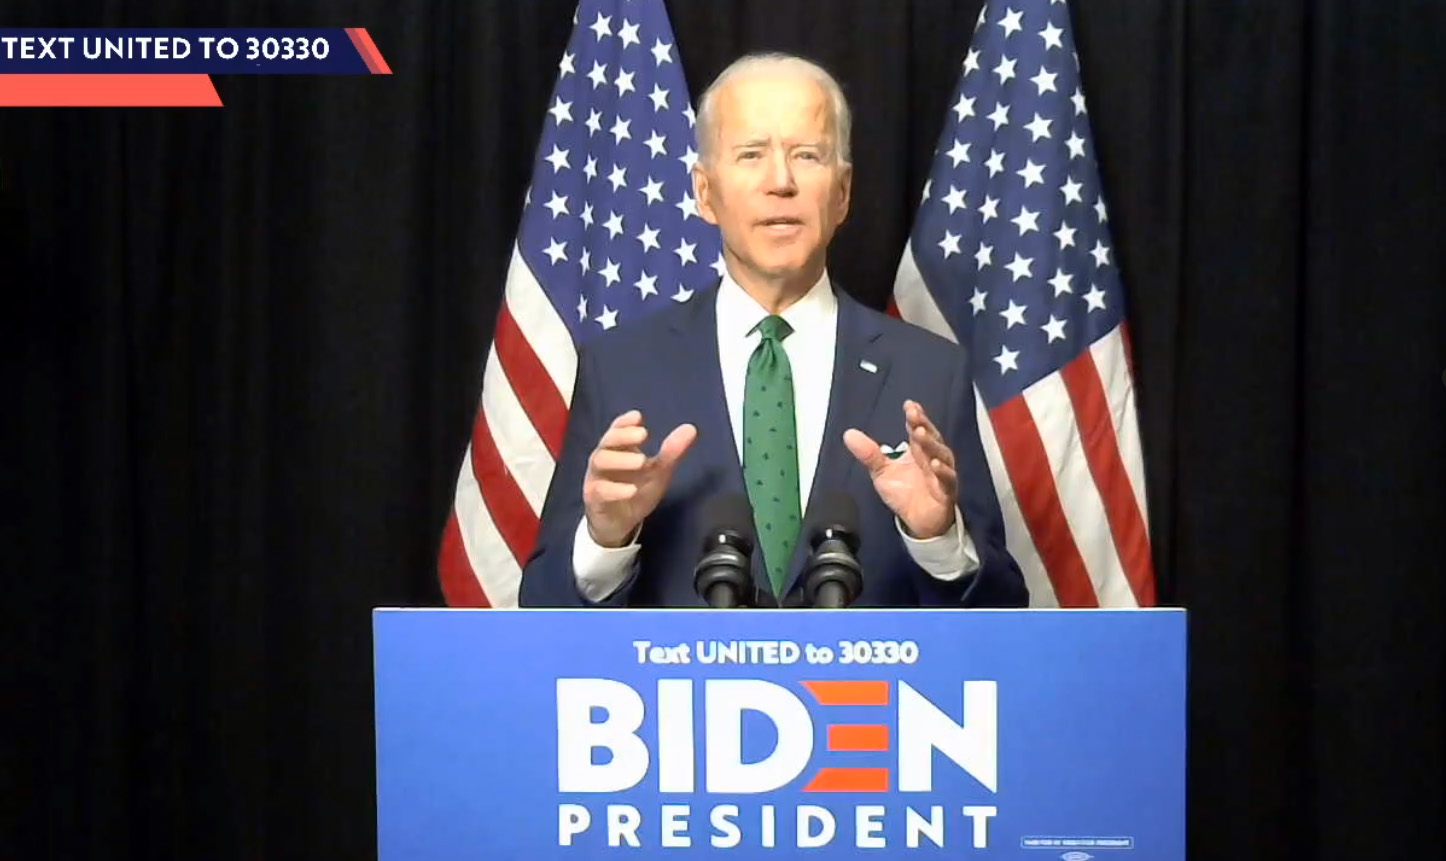 PHOTO: Former Vice President Joe Biden makes a statement via livestream from his home in Wilmington, Del., on the day that voters from Arizona, Florida and Illinois went to the polls for their state primaries, March 17, 2020.